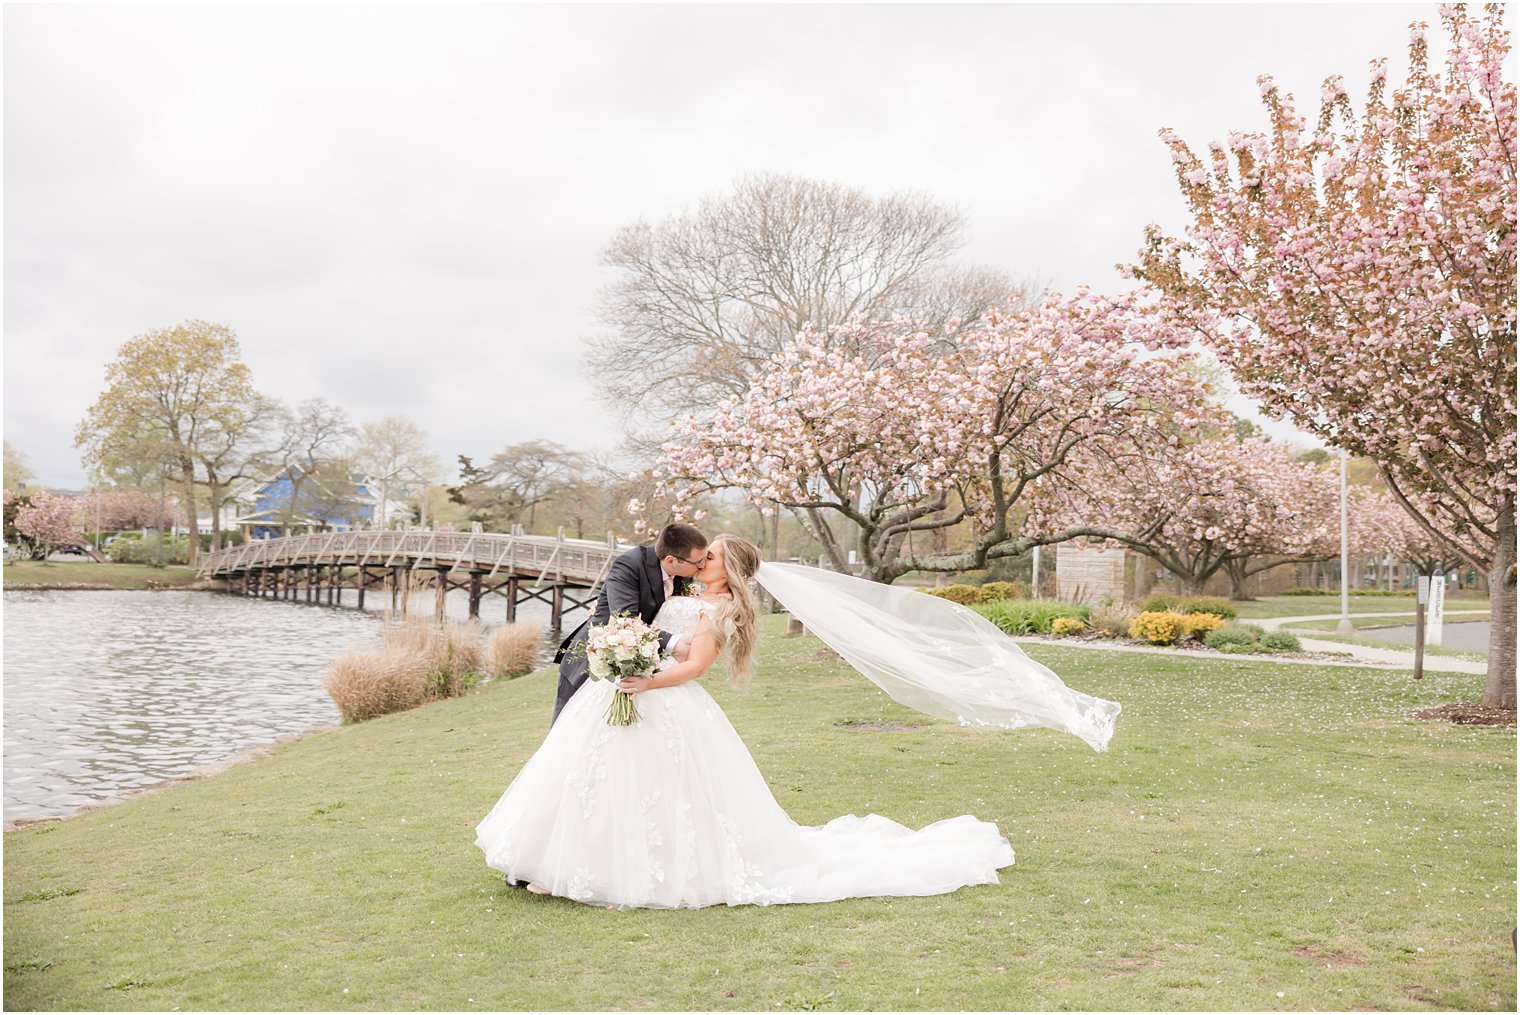 groom dips bride kissing her while veil floats behind them in front of cherry blossoms trees 